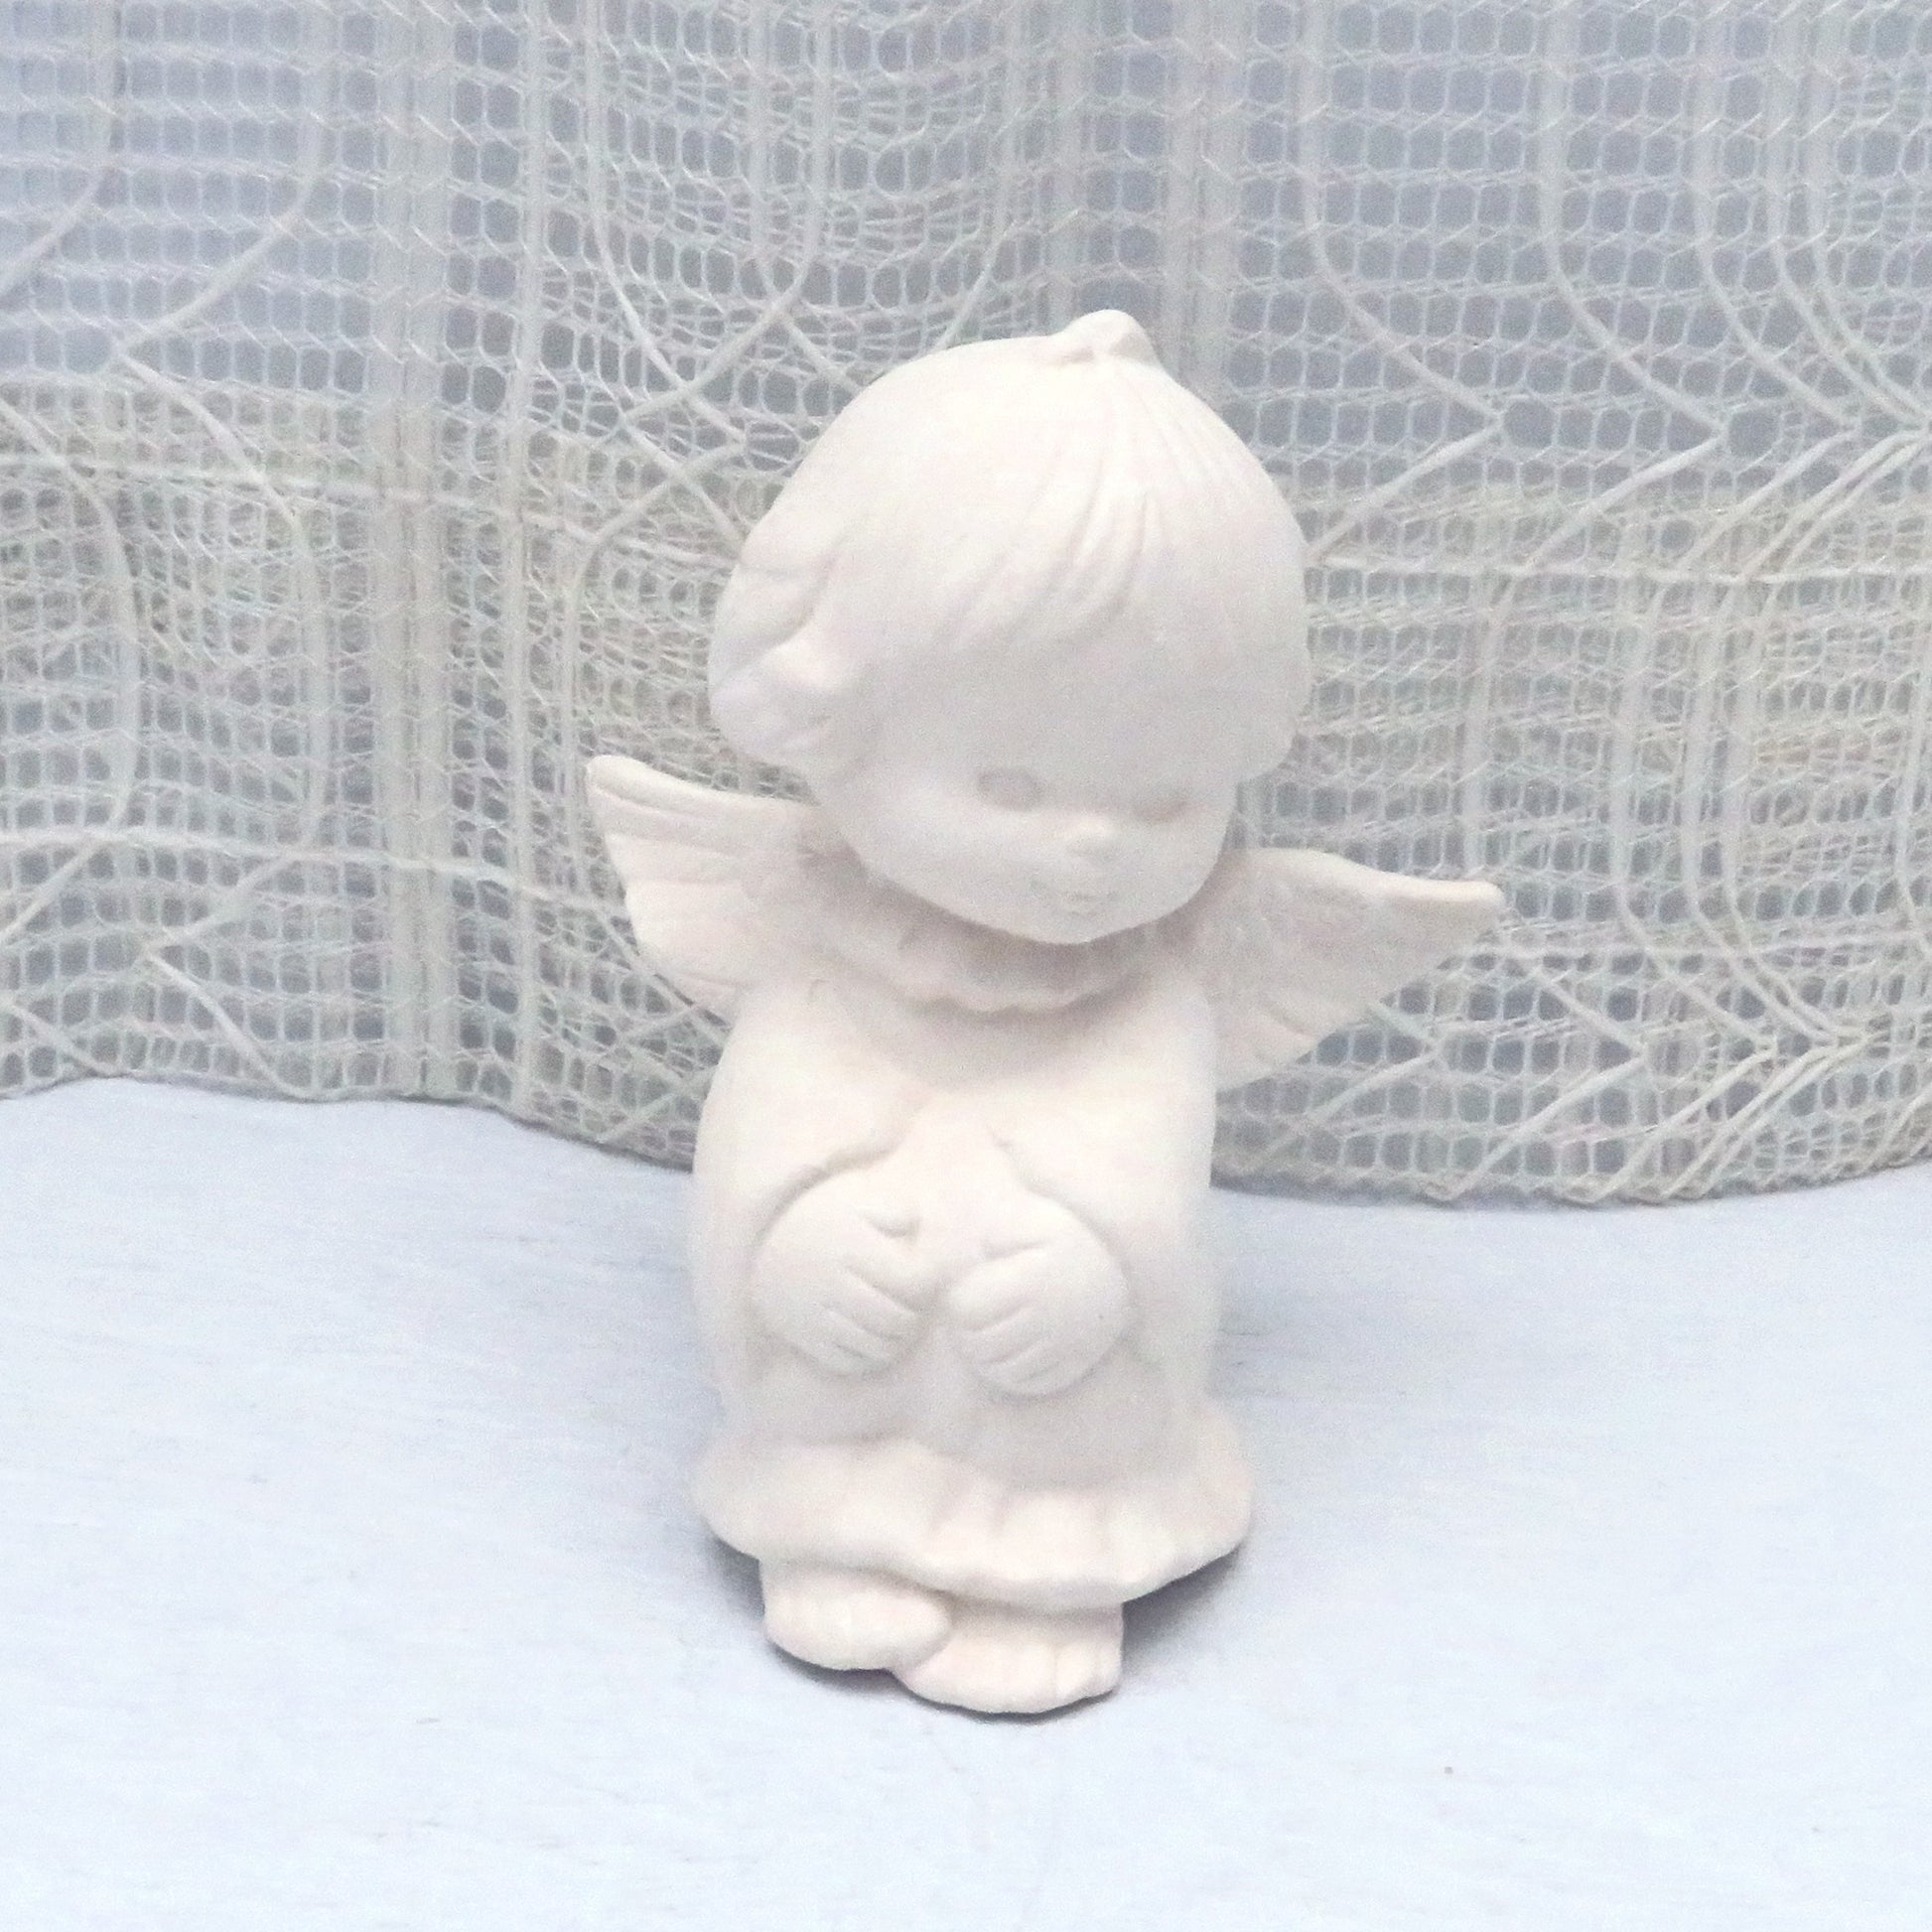 Handmade ready to paint ceramic angel sitting on pale blue table with ecru lacy curtain behind it.  Her wings are outstretched.  She is sitting with her knees up and her hands on her knees.